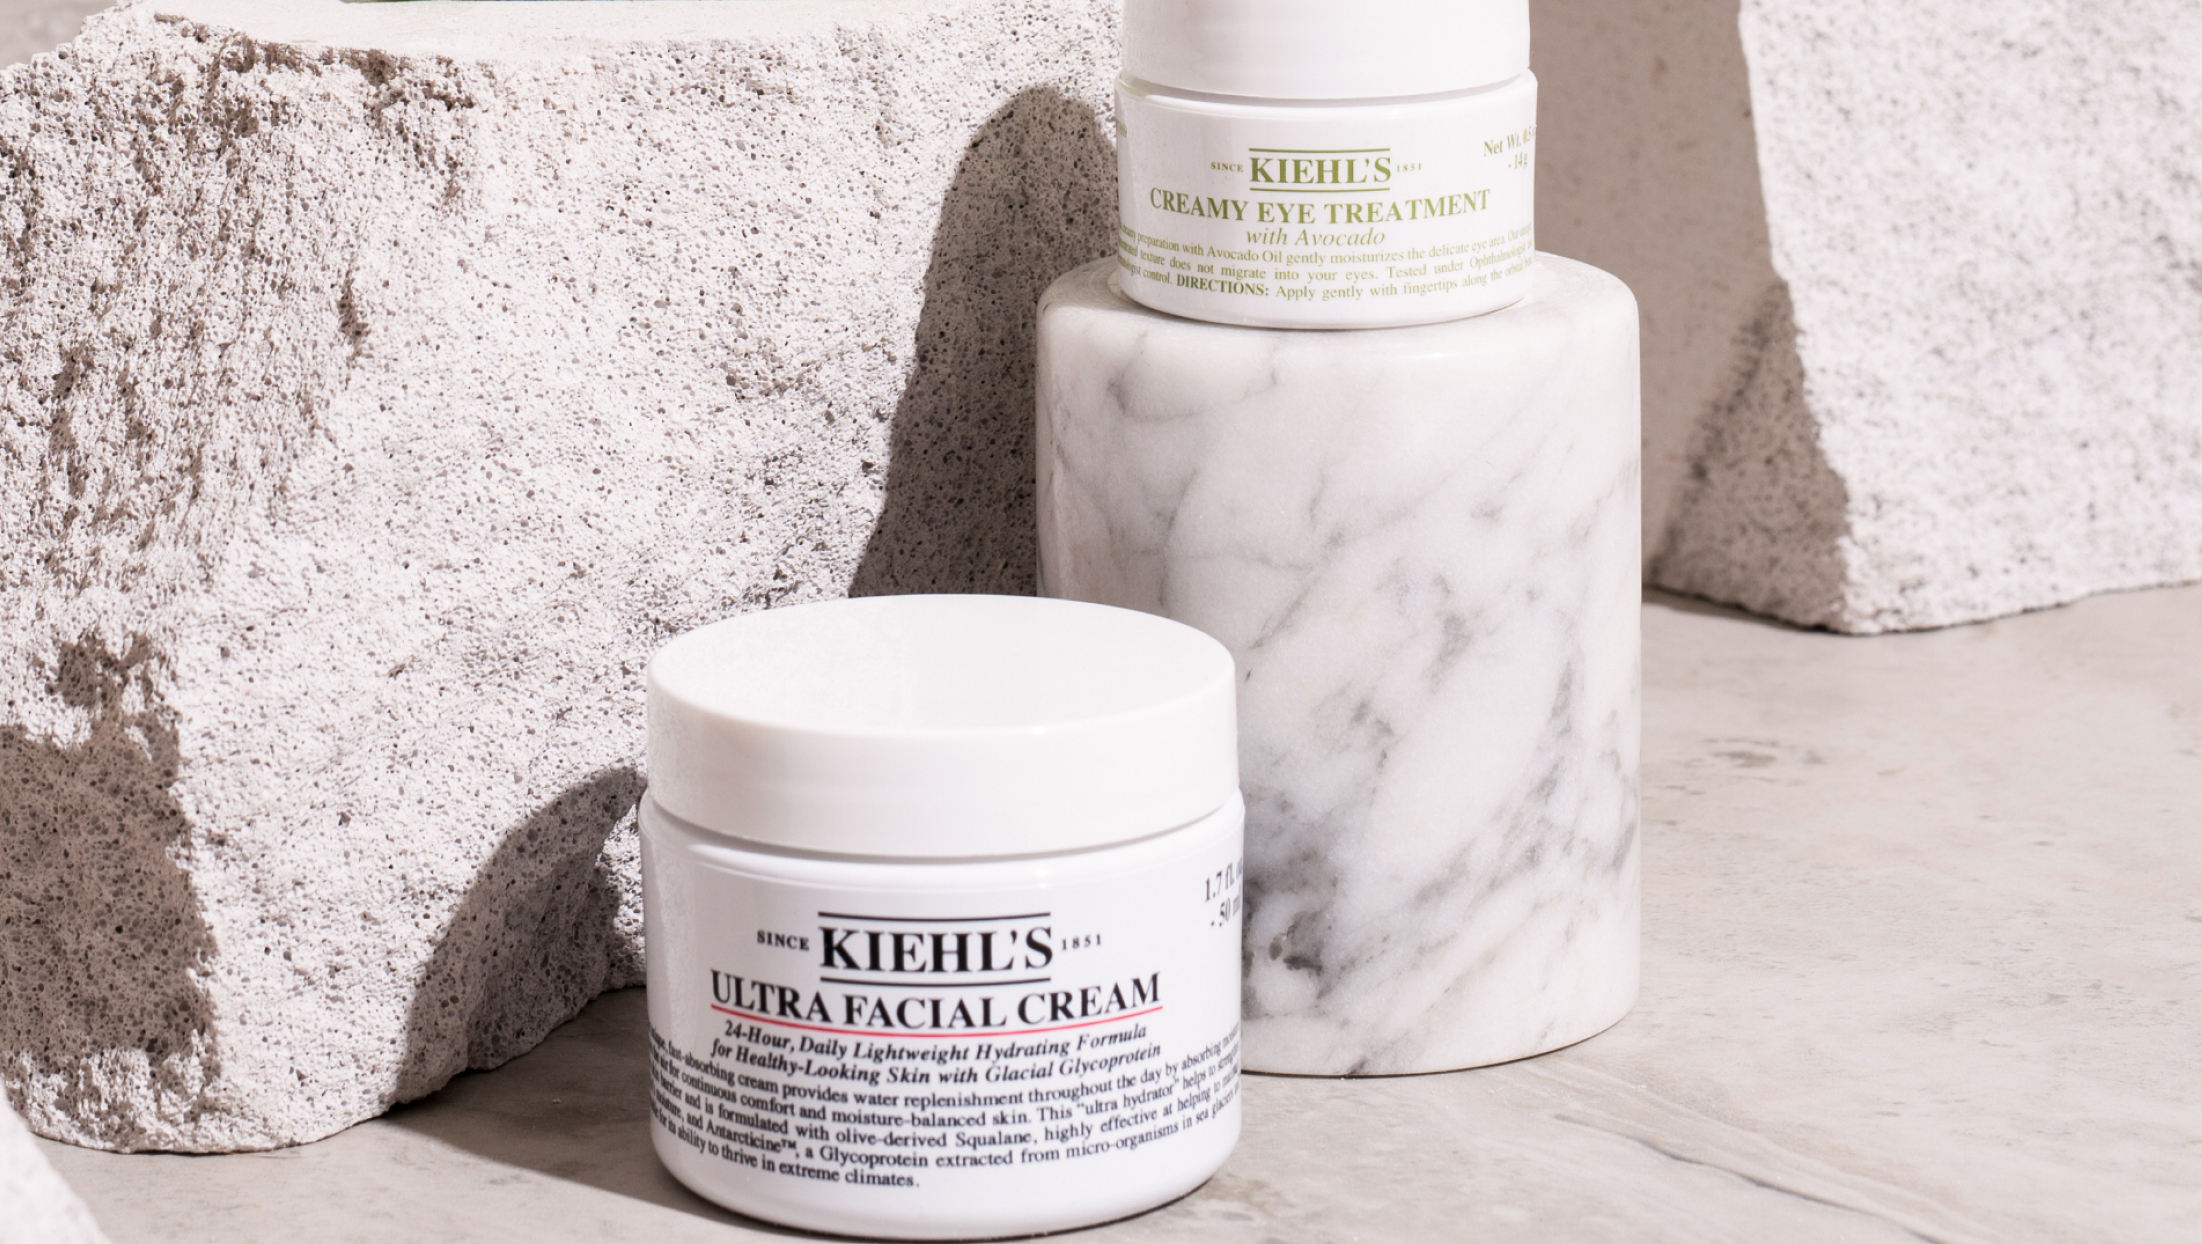 Kiehls Products: Transform Your Skin with Ultimate Care and Radiant Results